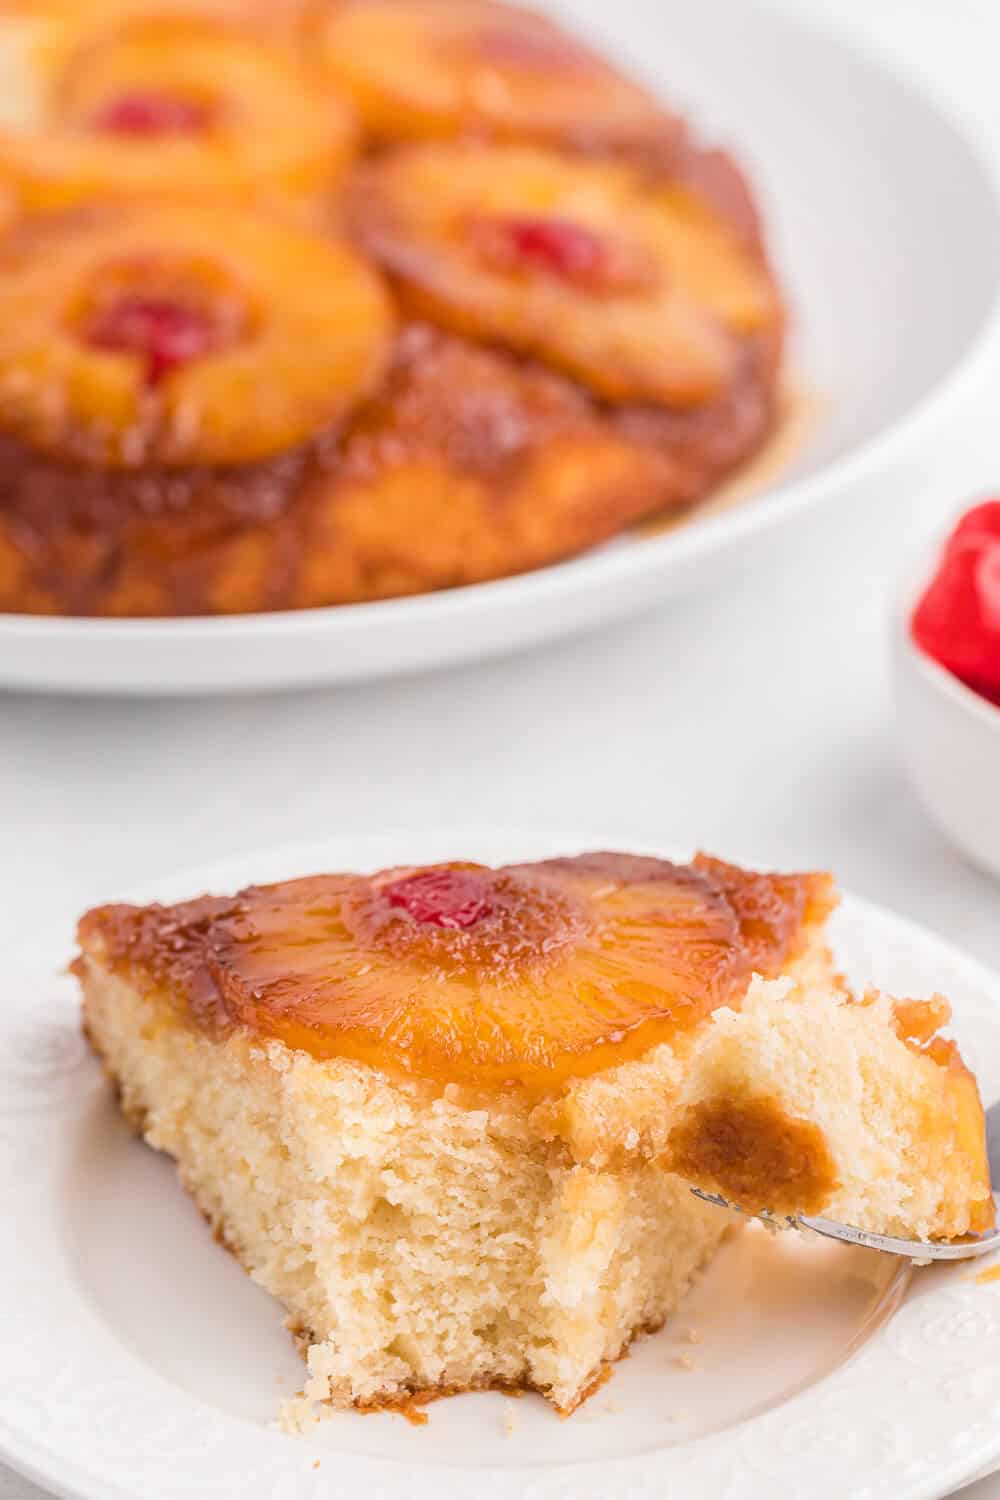 Pineapple upside down cake slice with a bite out of the end